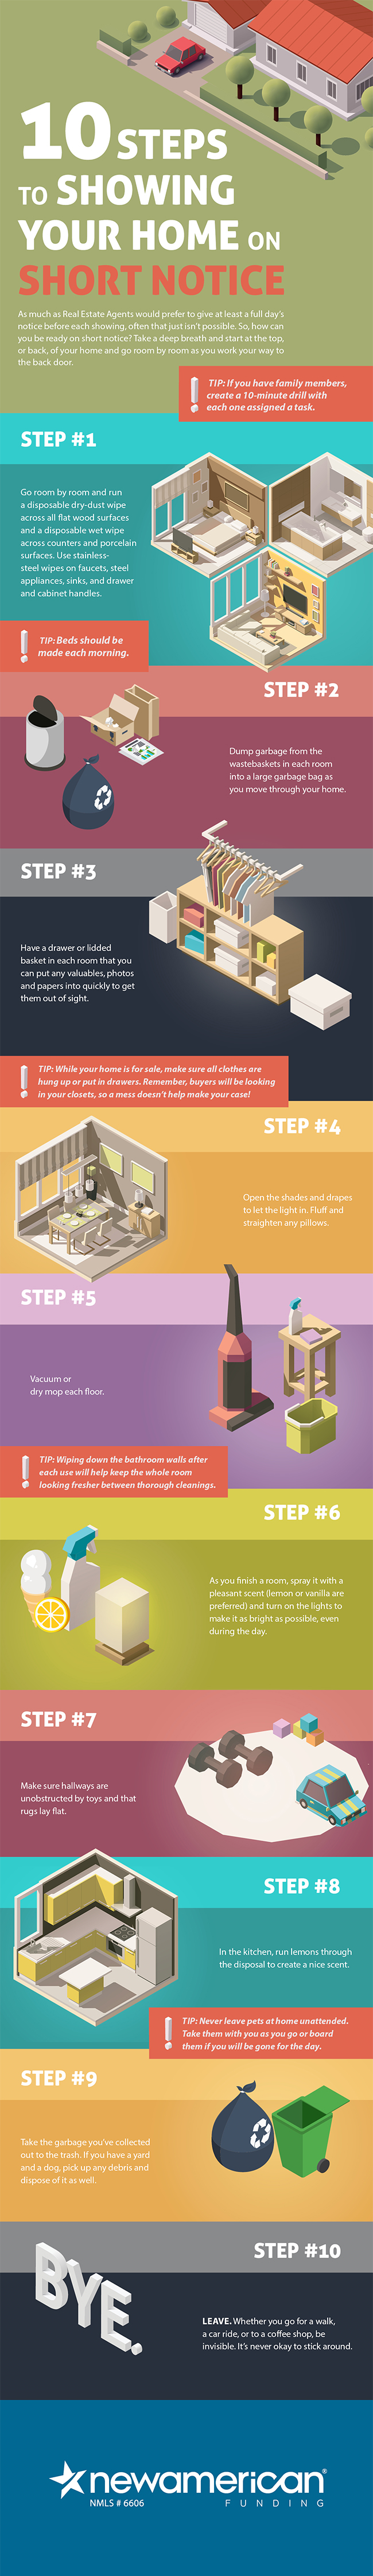 10 Steps To Shpwing Your Home On Short Notice